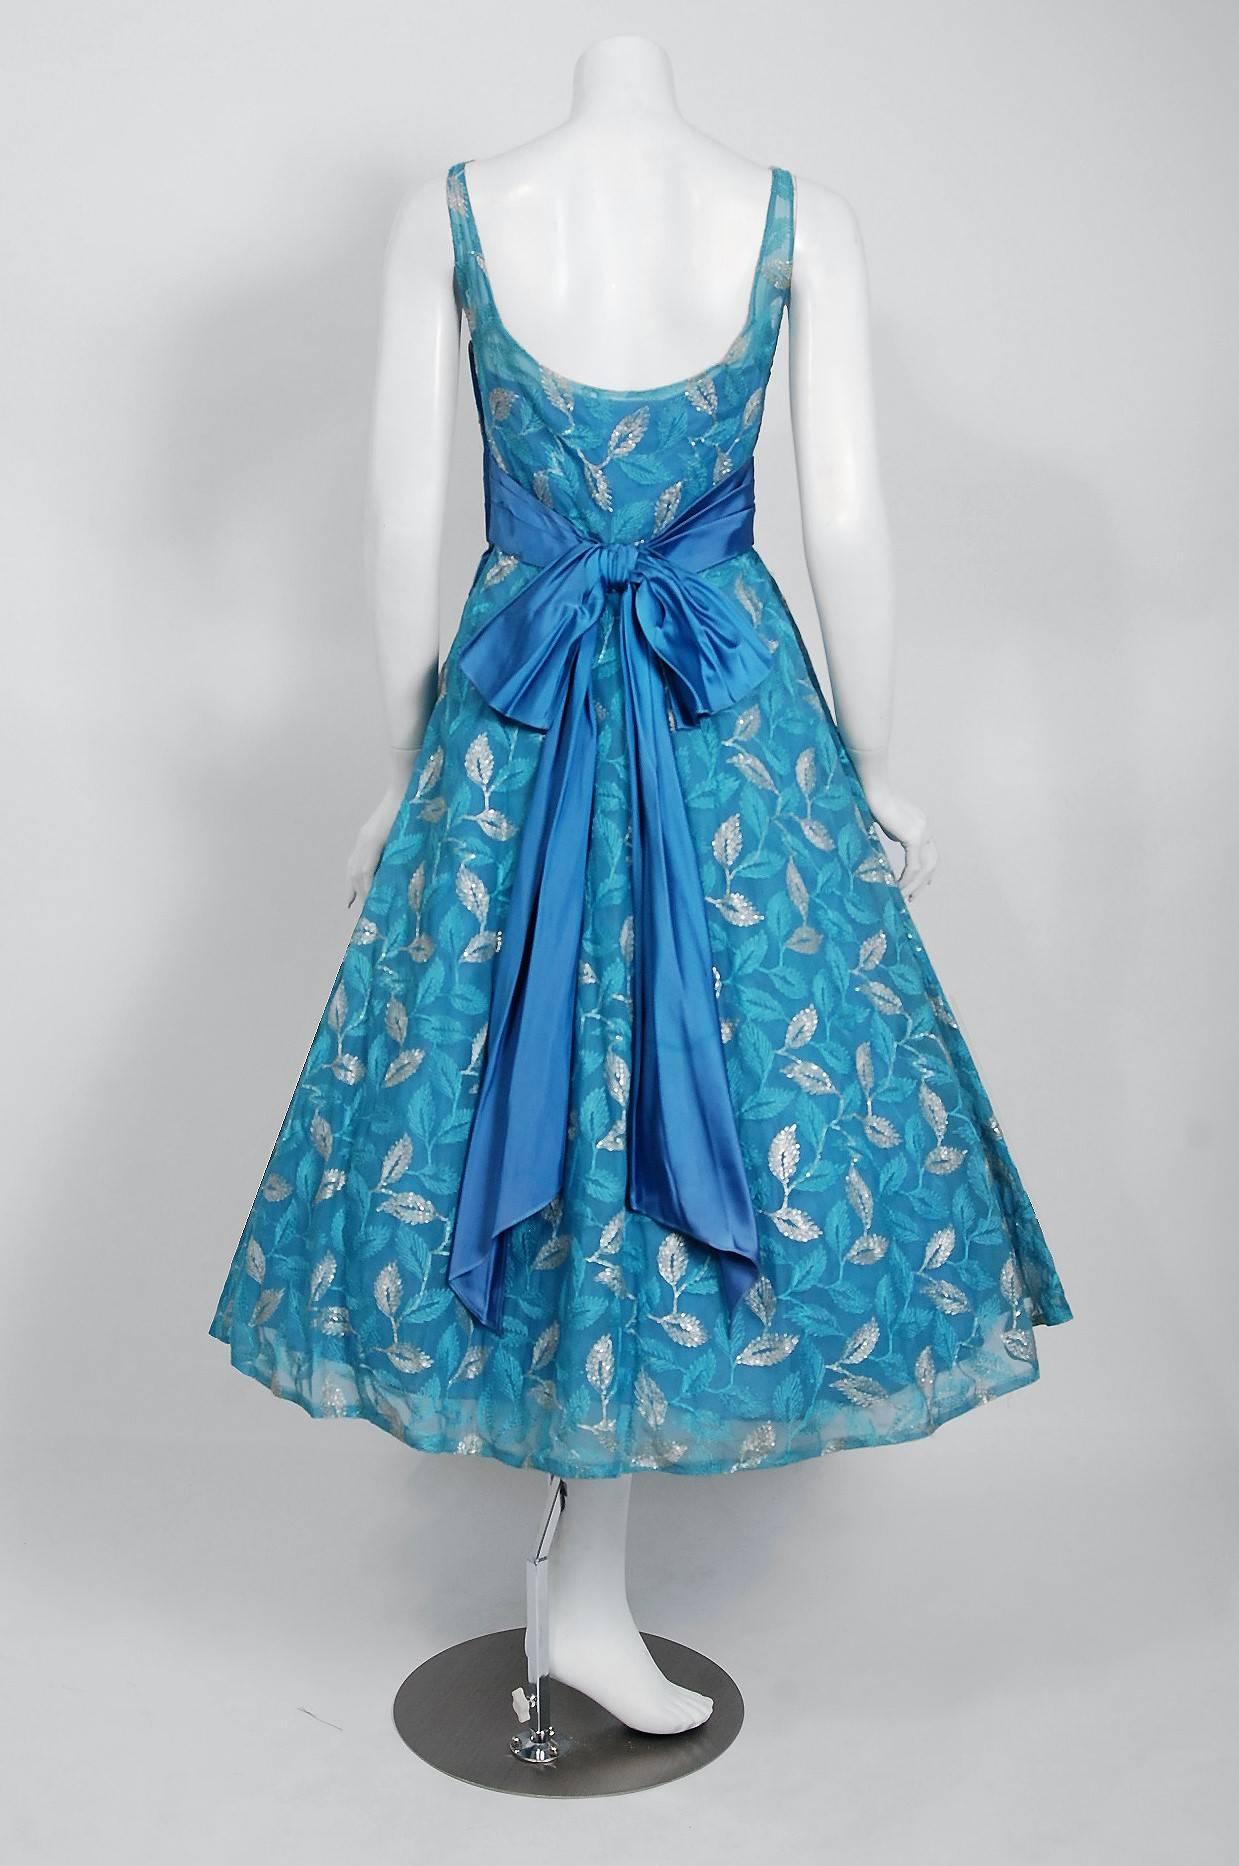 Vintage 1950's Metallic Leaves Embroidered Blue Chiffon Sash-Bow Party Dress 2